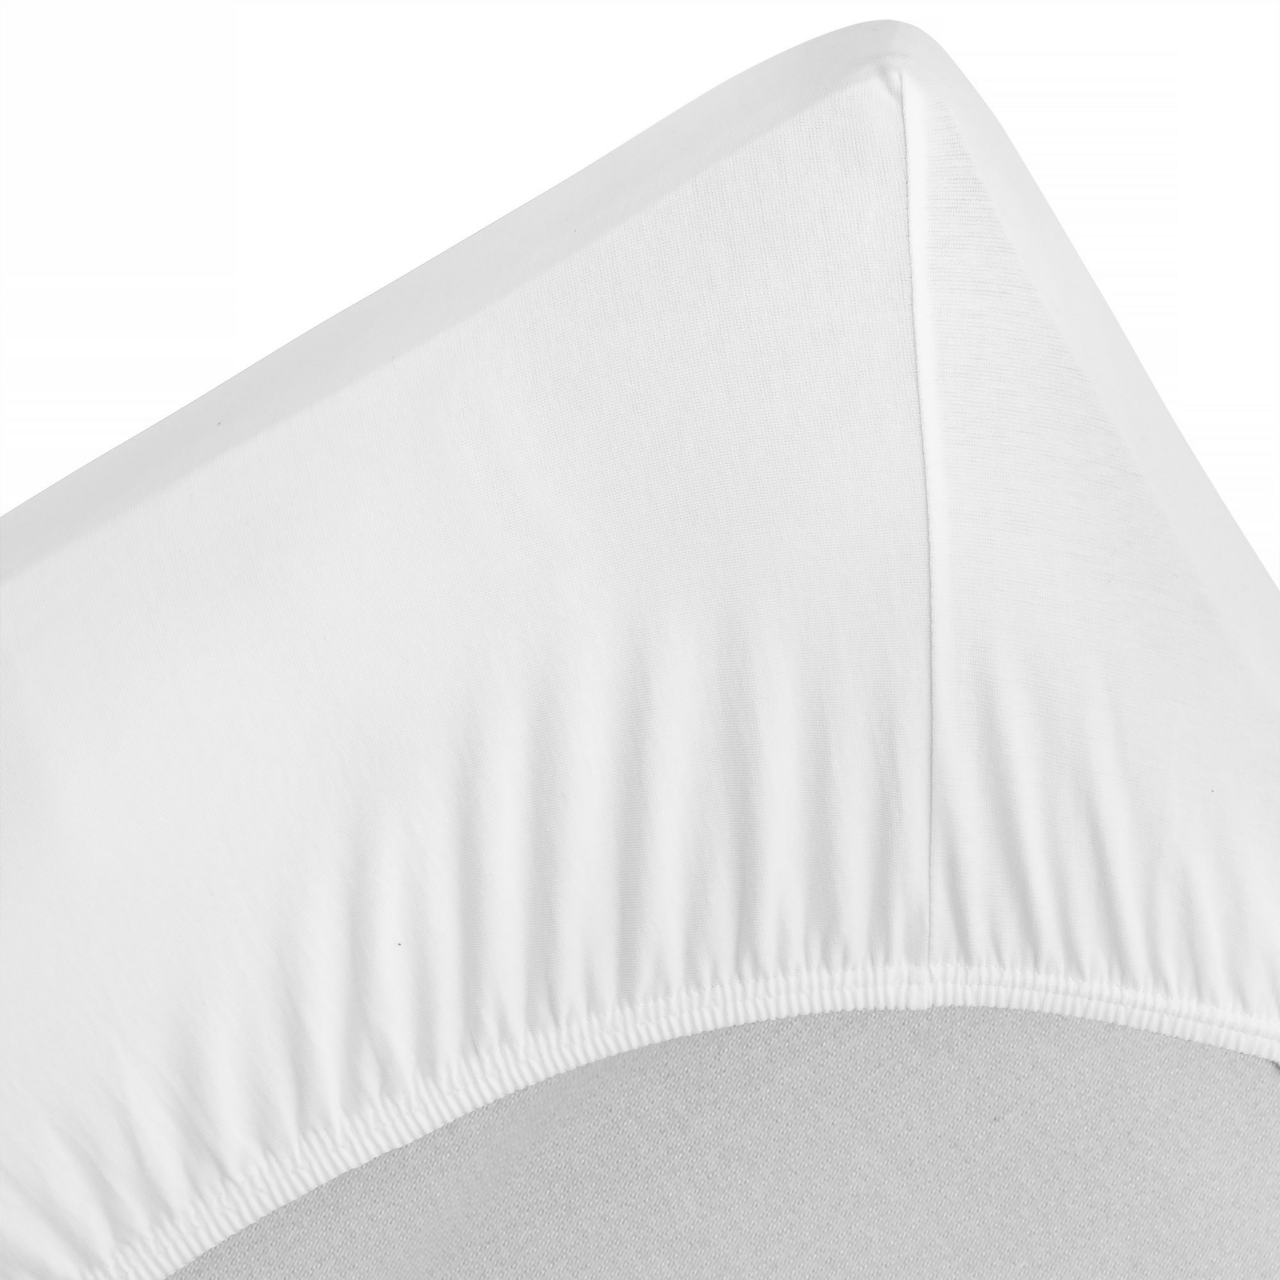 Mattress Cover, fitted sheet 120x200 cm white